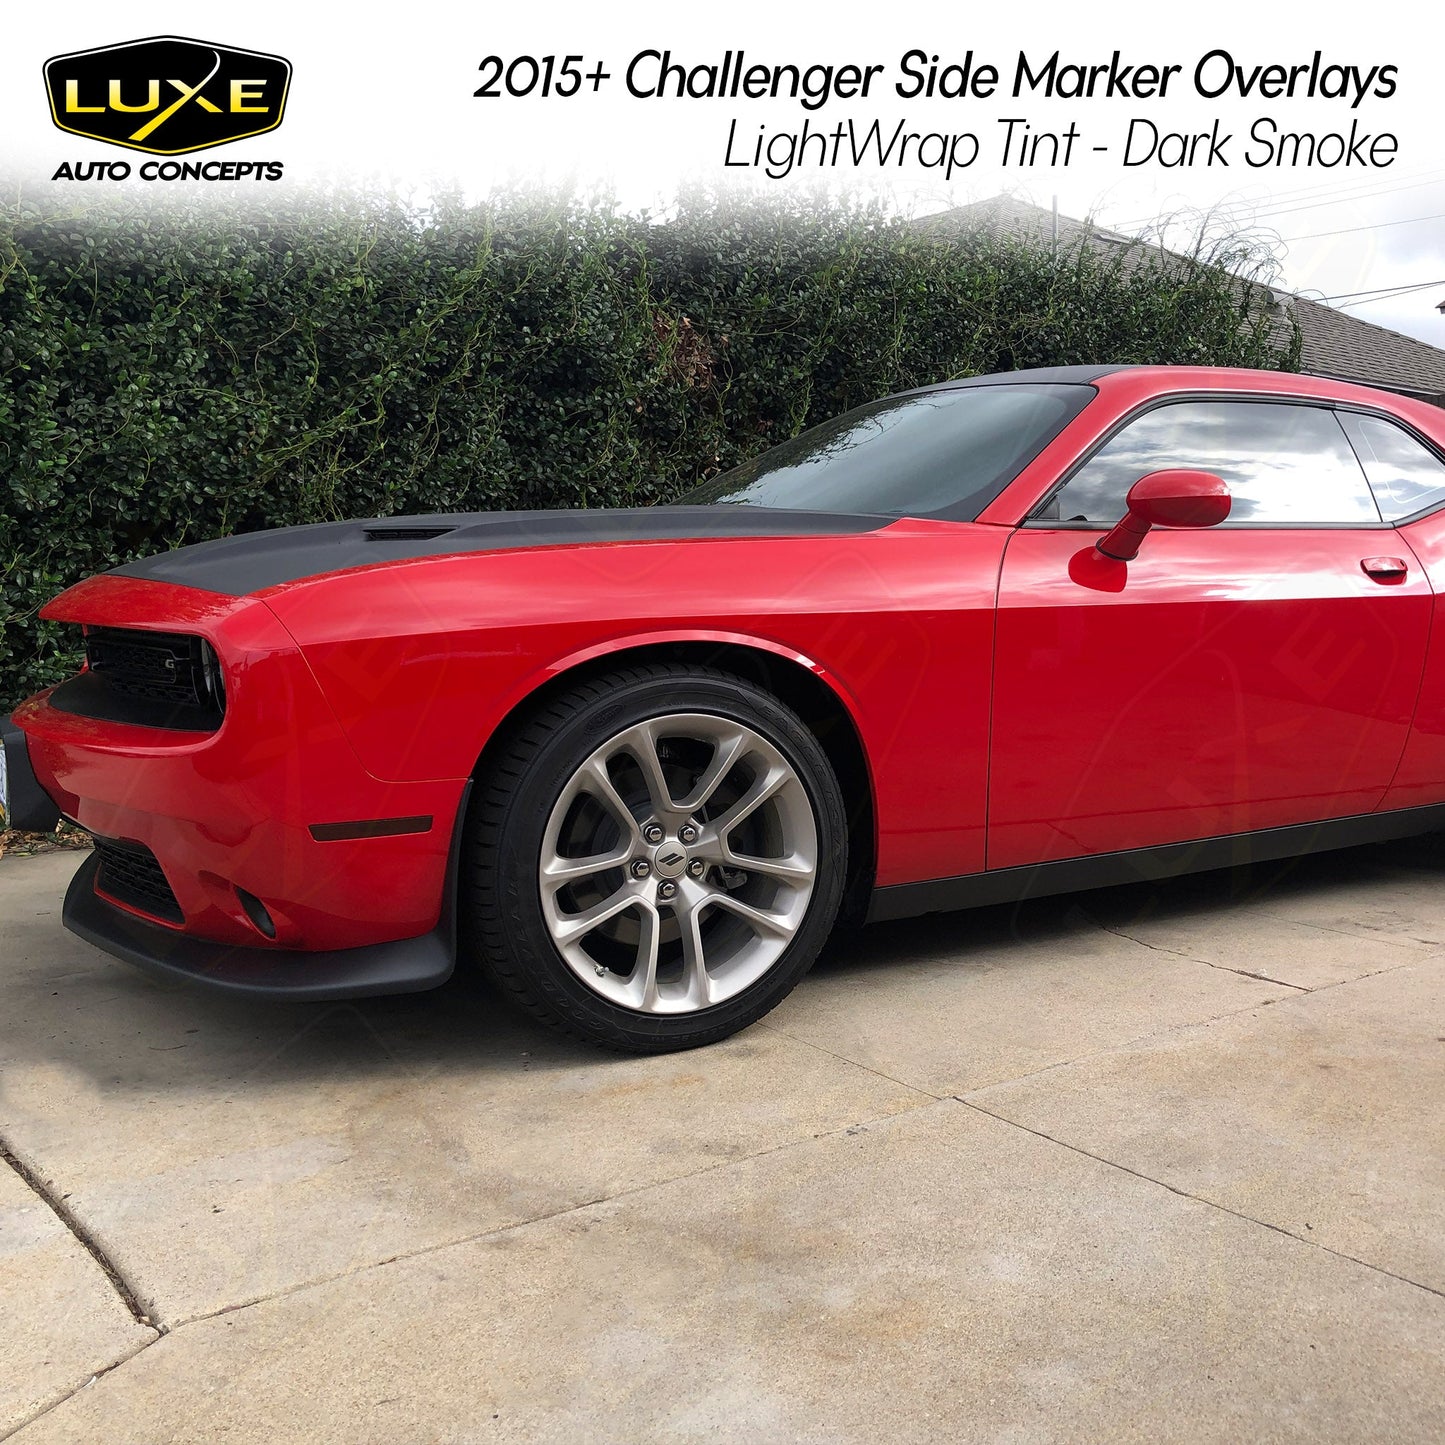 2015+ Challenger Tint Bundle - Tail Lights, Side Markers, Rear Reflectors